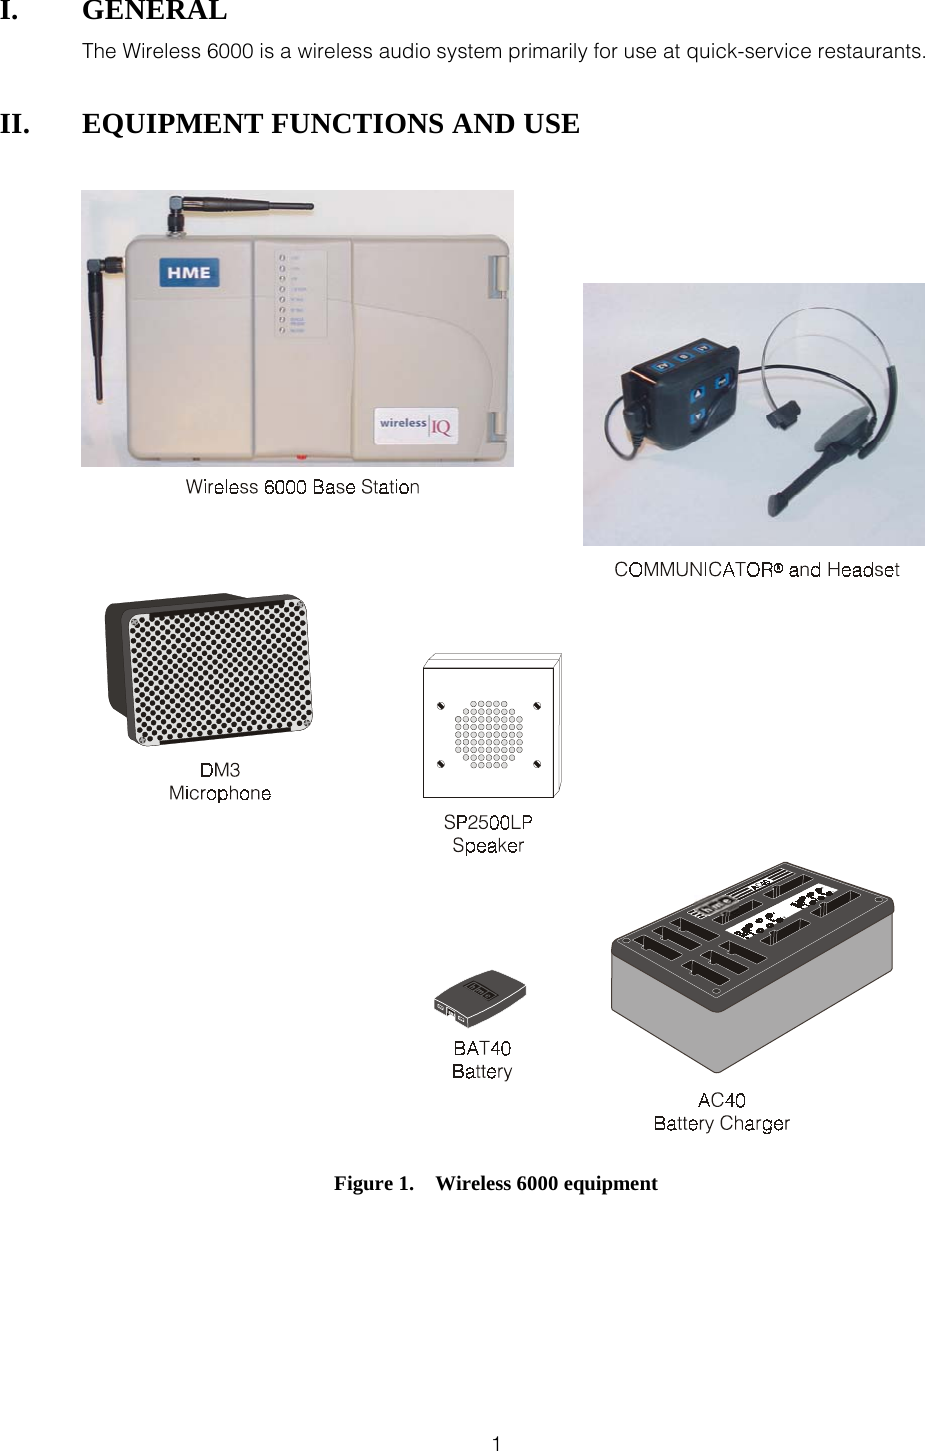  1 I. GENERAL The Wireless 6000 is a wireless audio system primarily for use at quick-service restaurants. II.  EQUIPMENT FUNCTIONS AND USE    Figure 1.    Wireless 6000 equipment 